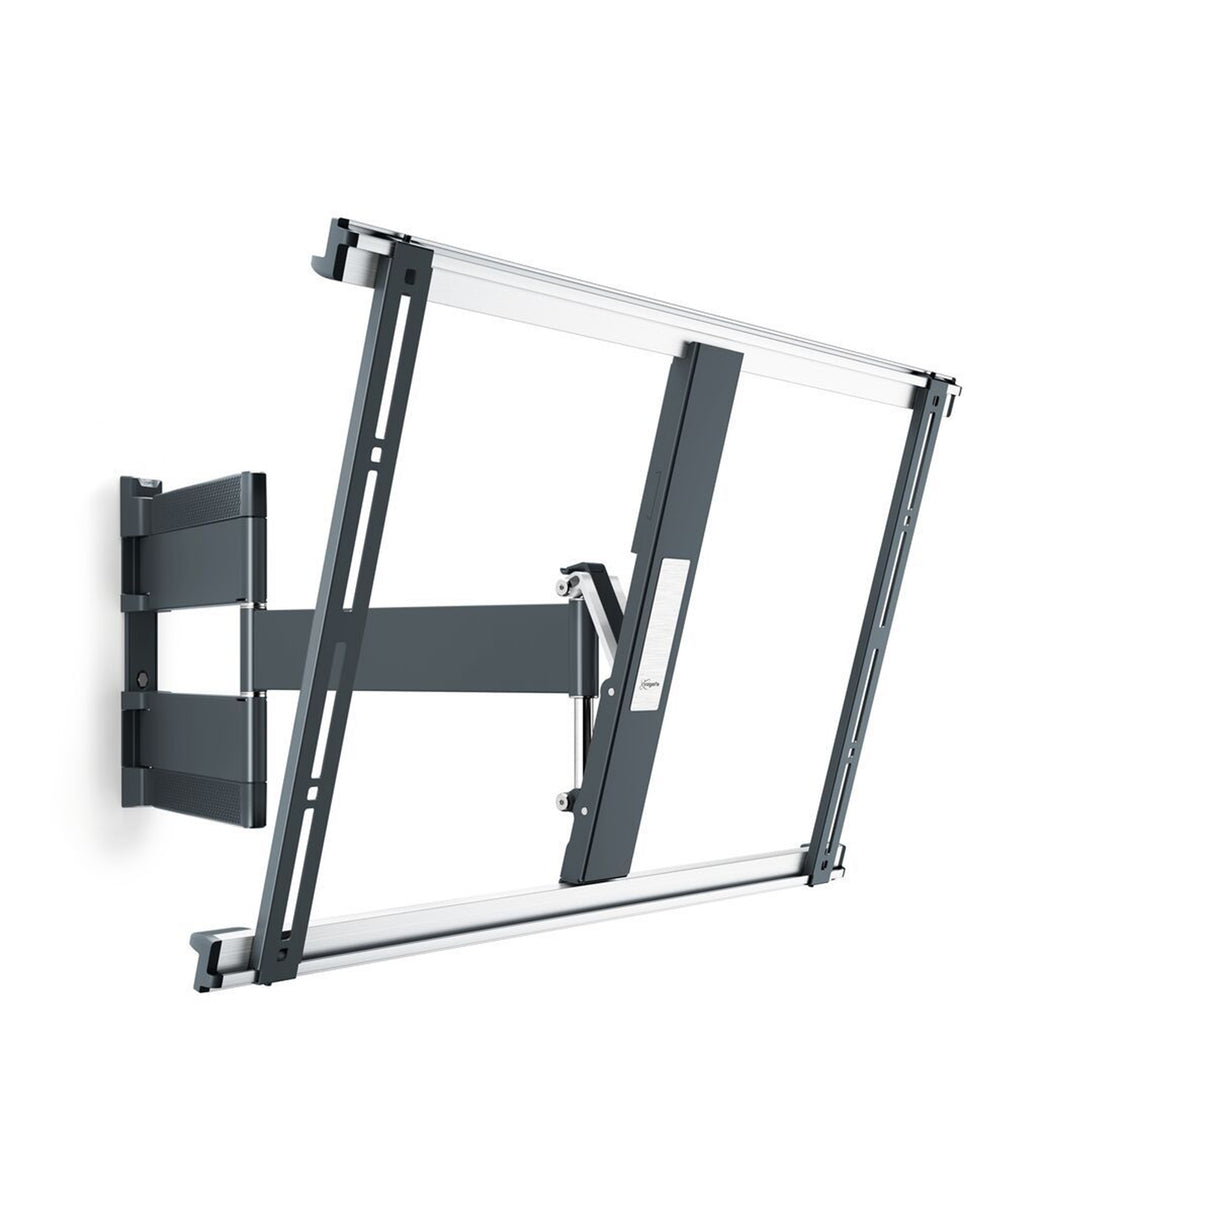 VOGELS Thin 545 - Extra Thin Full Motion TV Wall Mount